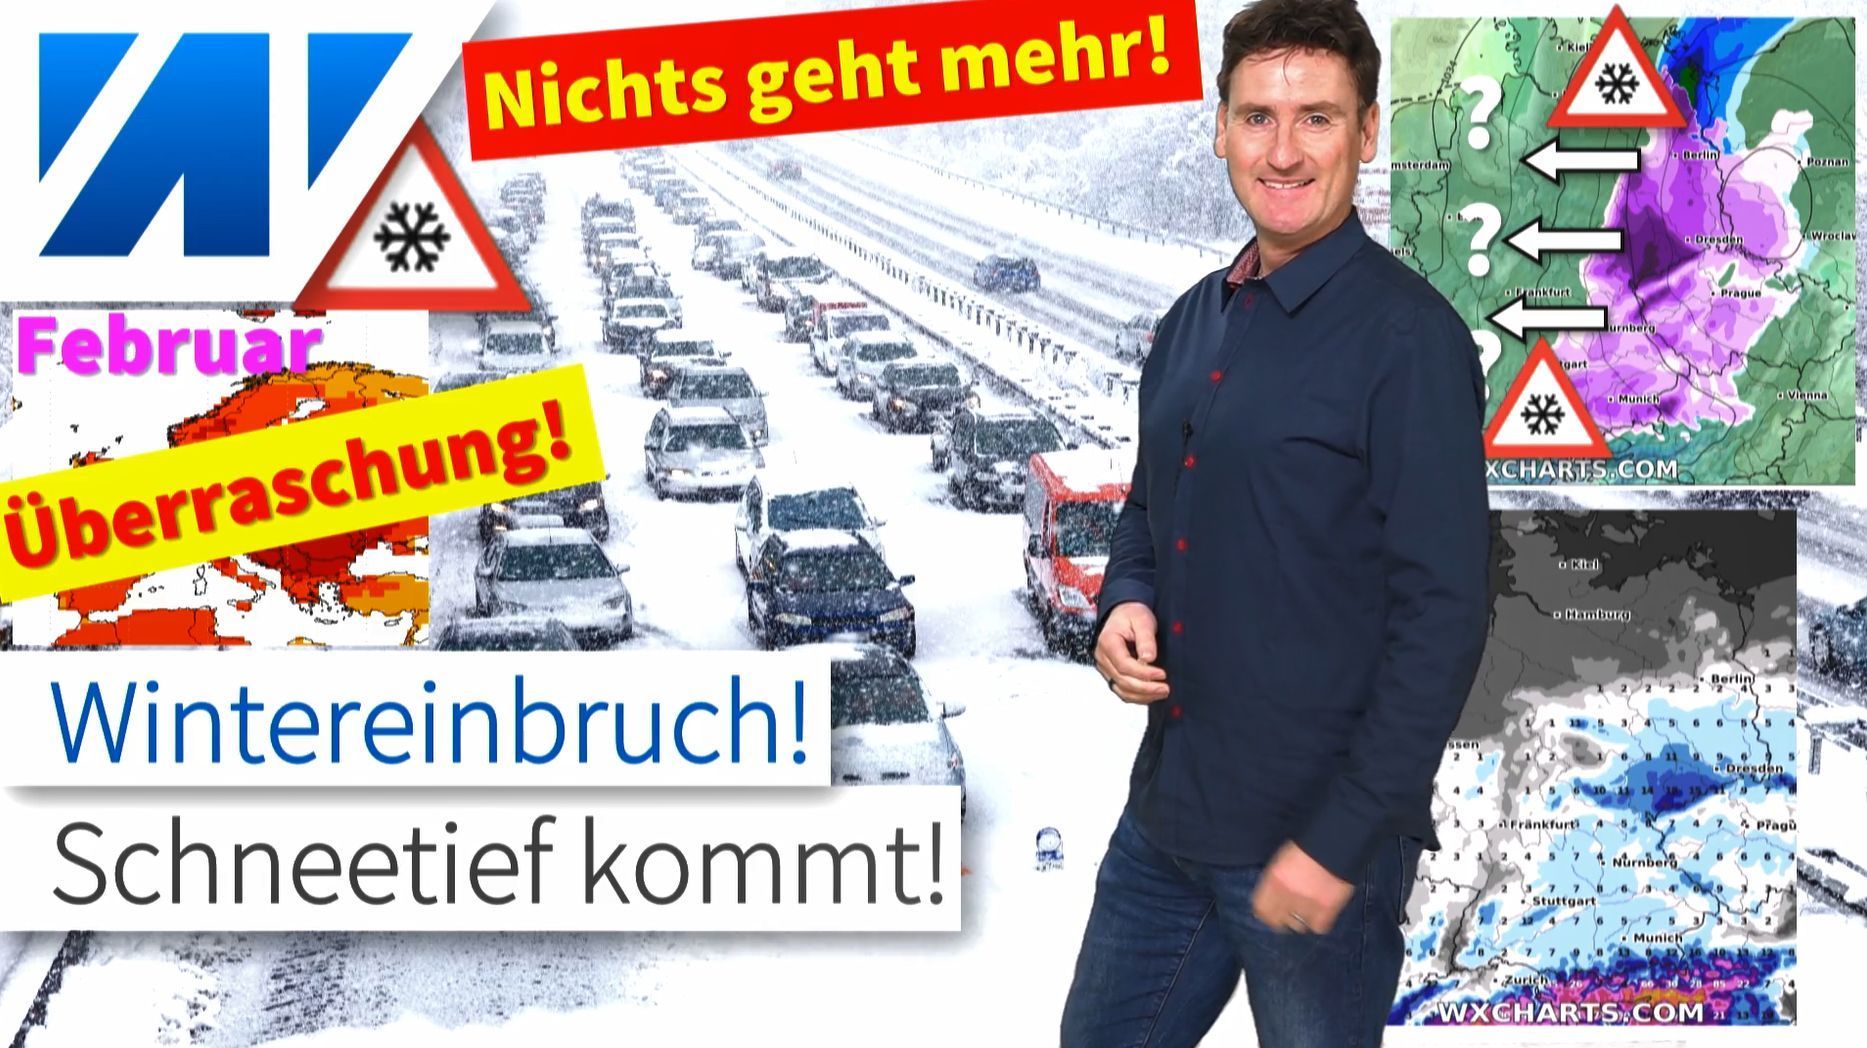 WARNING: Massive onset of winter could paralyze parts of Germany this weekend!